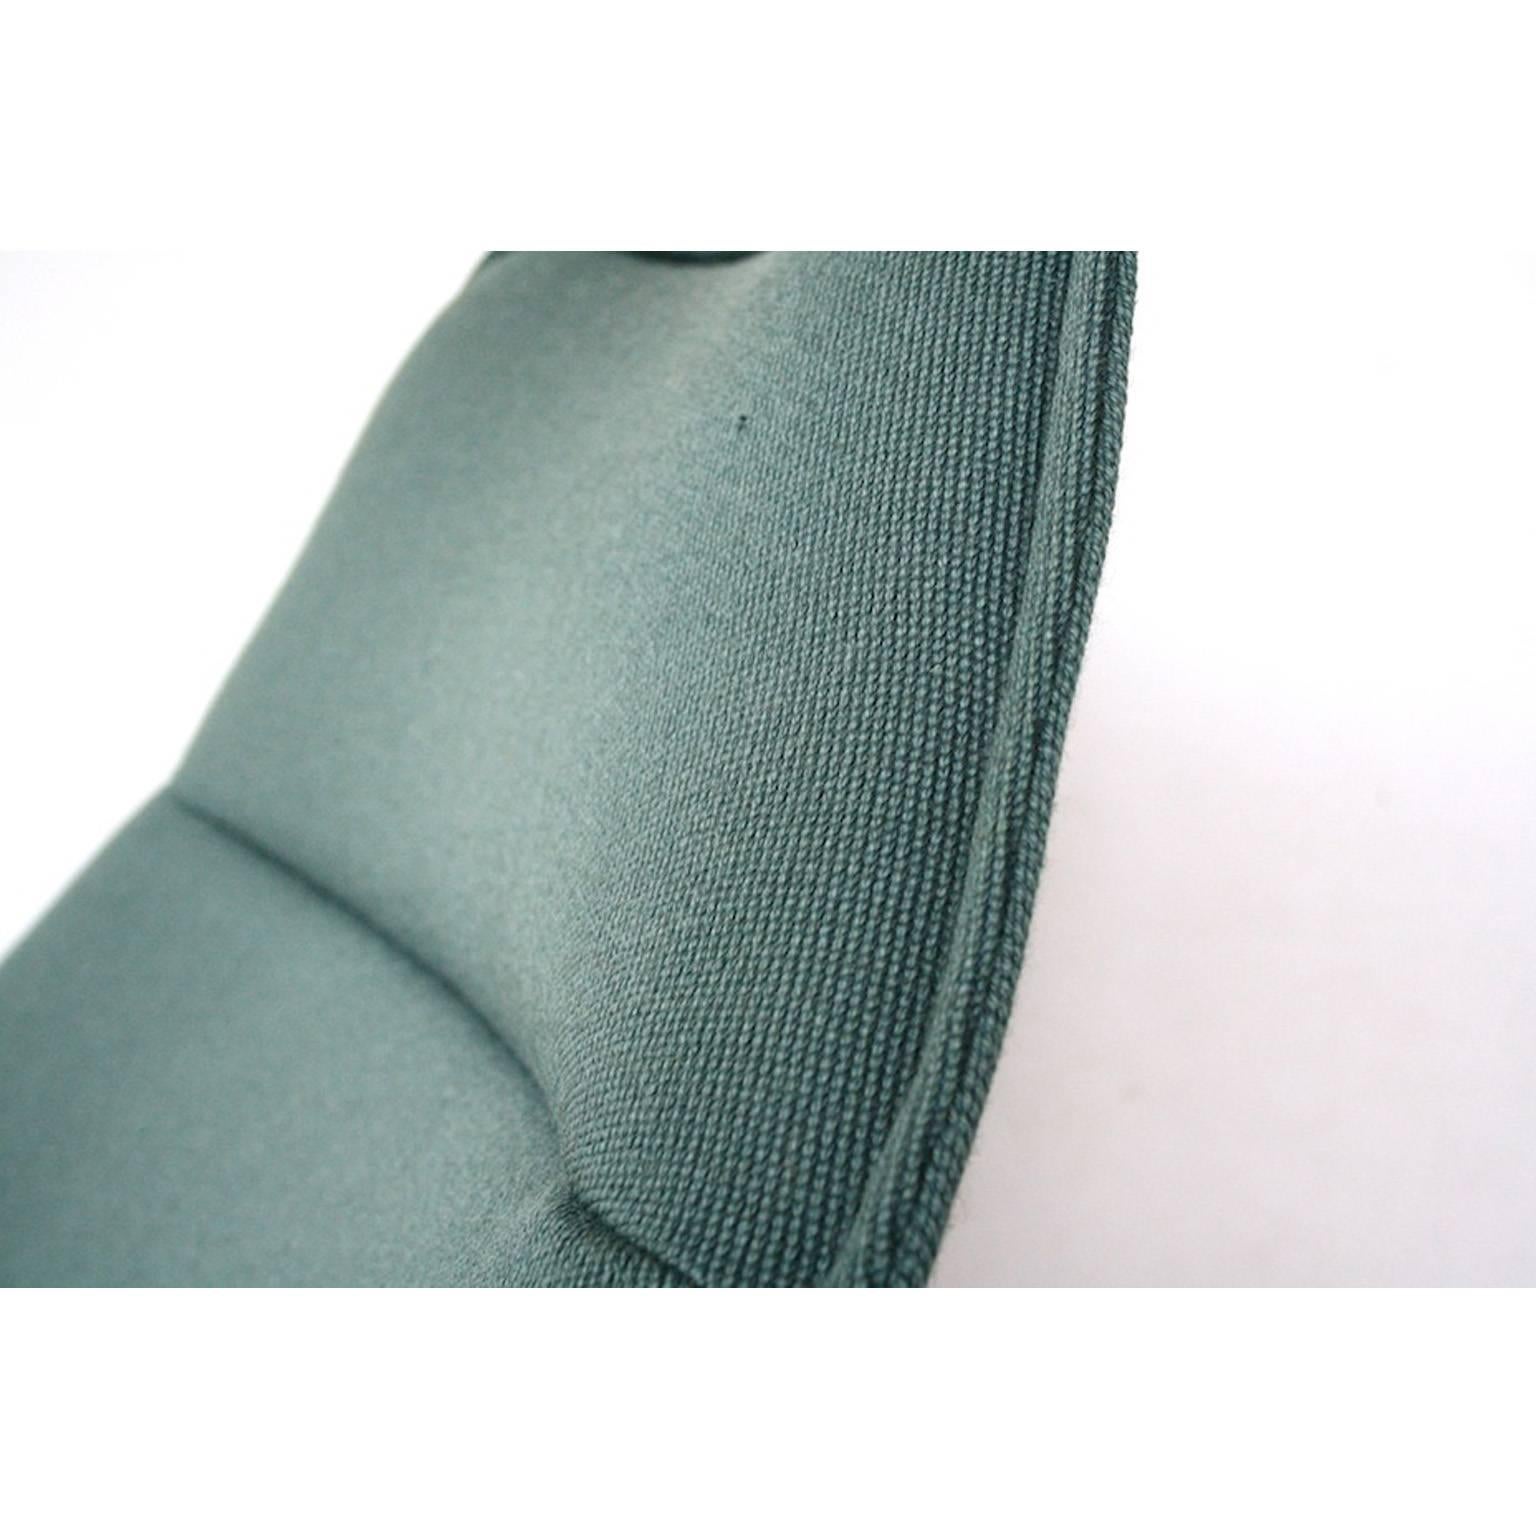 Mid-20th Century Mint Green F584 Lounge Chair by Geoffrey D. Harcourt for Artifort, Dutch Design  For Sale